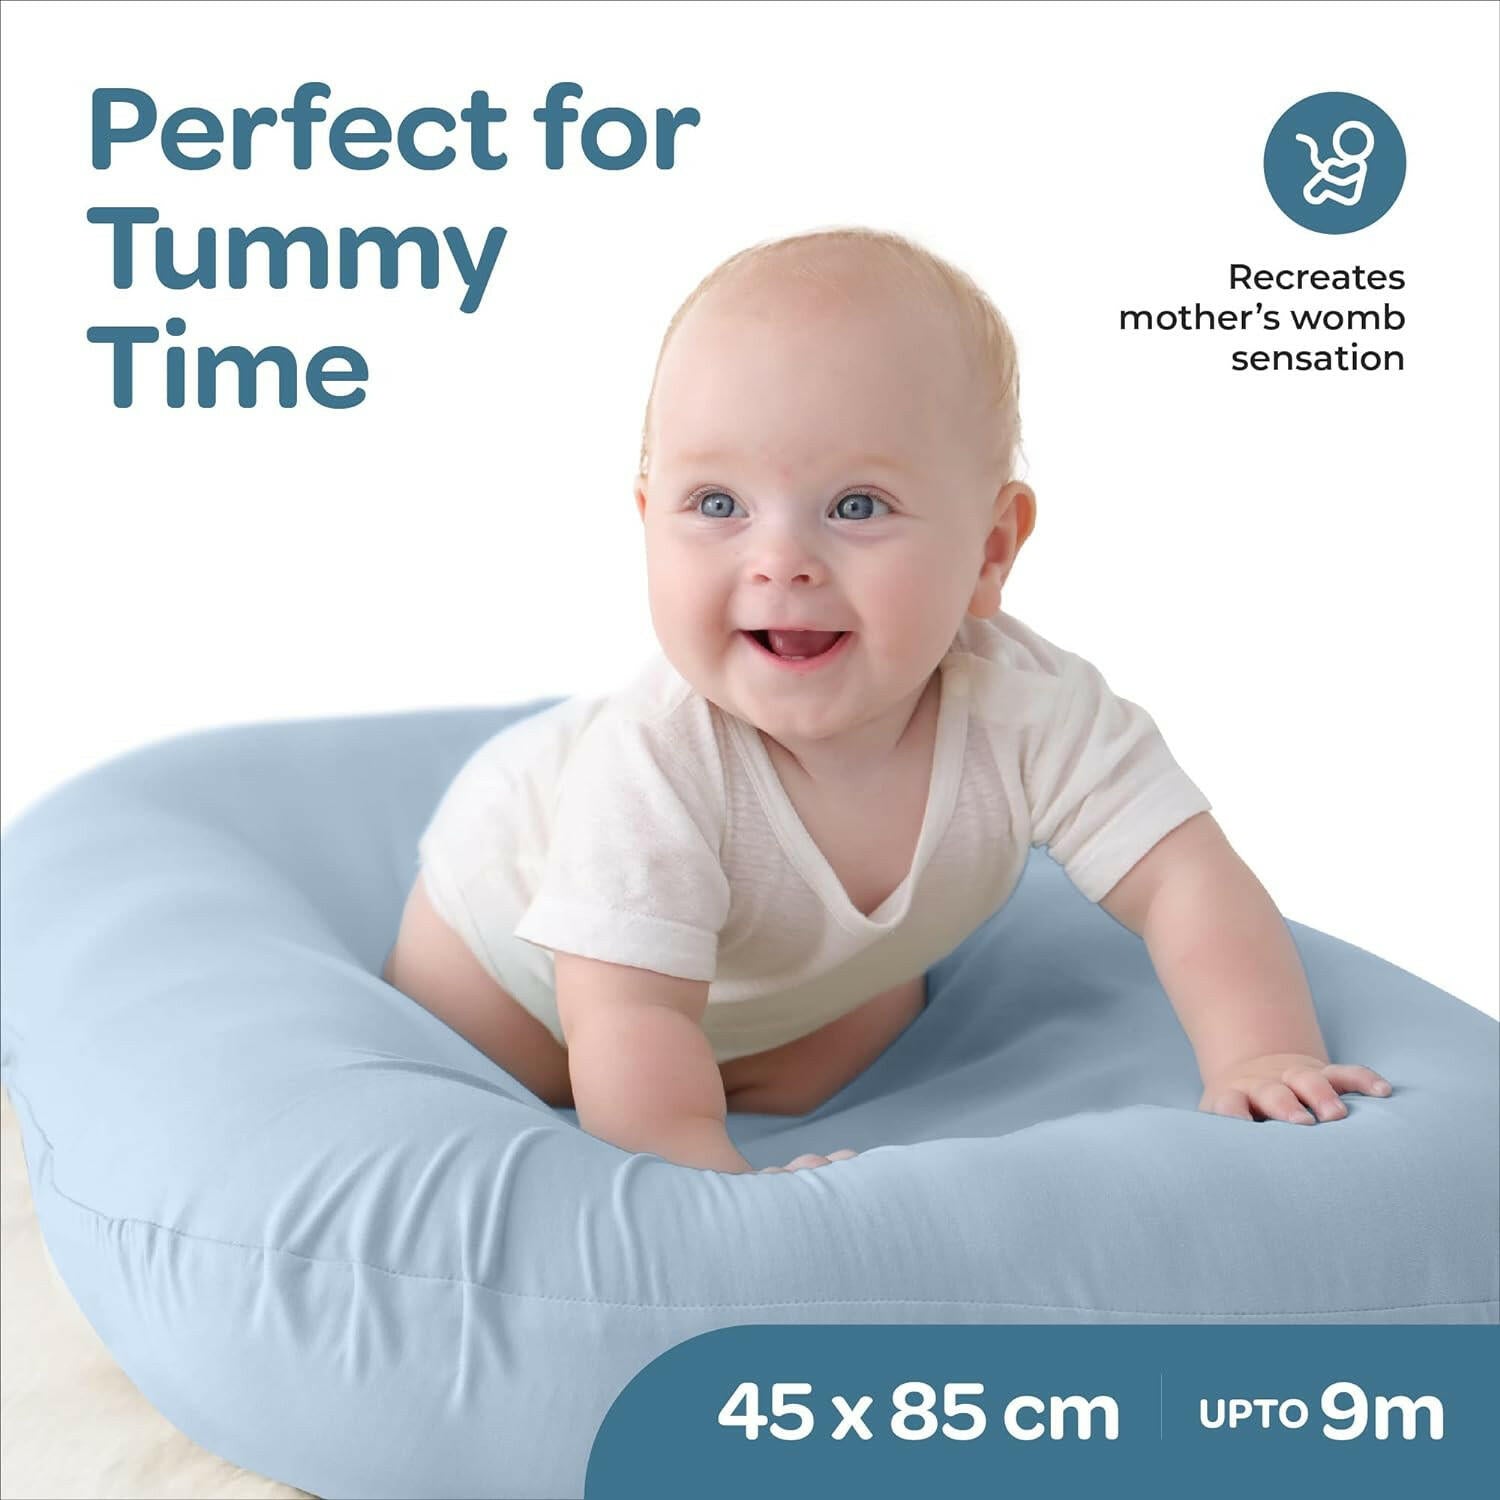 MOON Baby Lounger & Infant Floor Seat, Newborn Essentials Cotton Fabric Baby Nest Ultra Comfortable Infant Napper, Portable and Adjustable Newborn Sleeper, Suitable for 0-9 Months